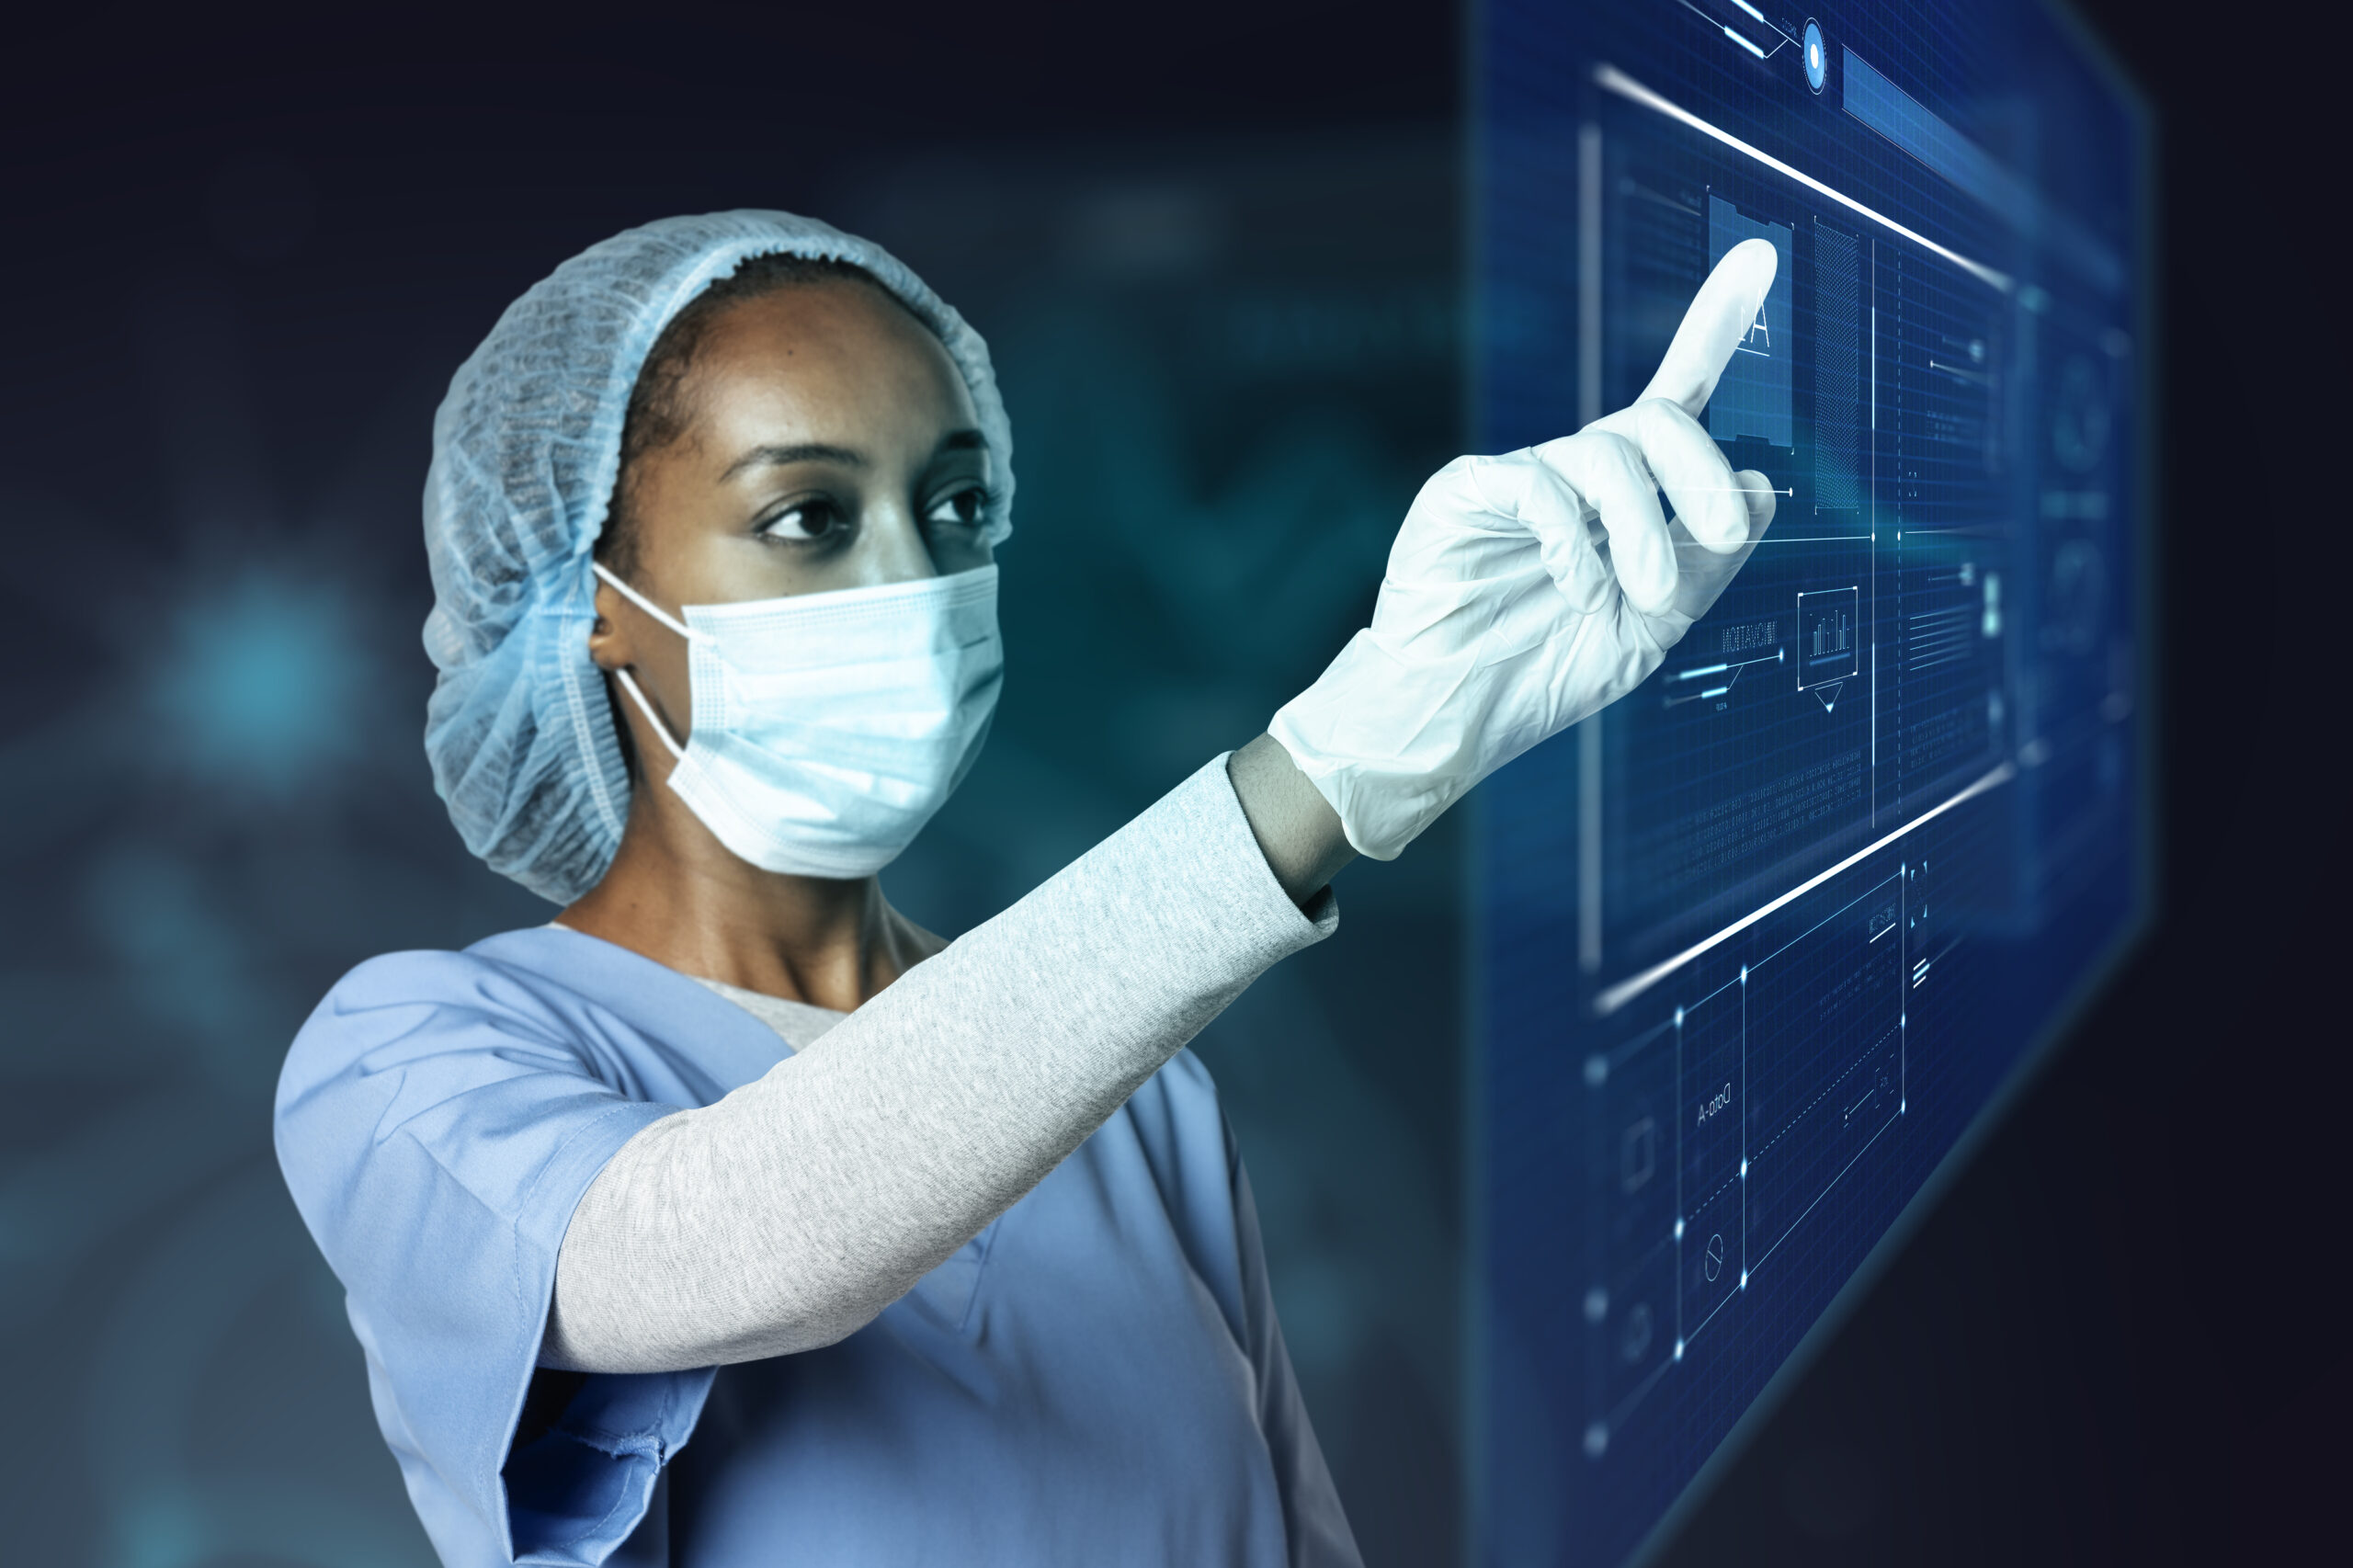 Is the Healthcare industry equipped with & ready to adapt to the technology?